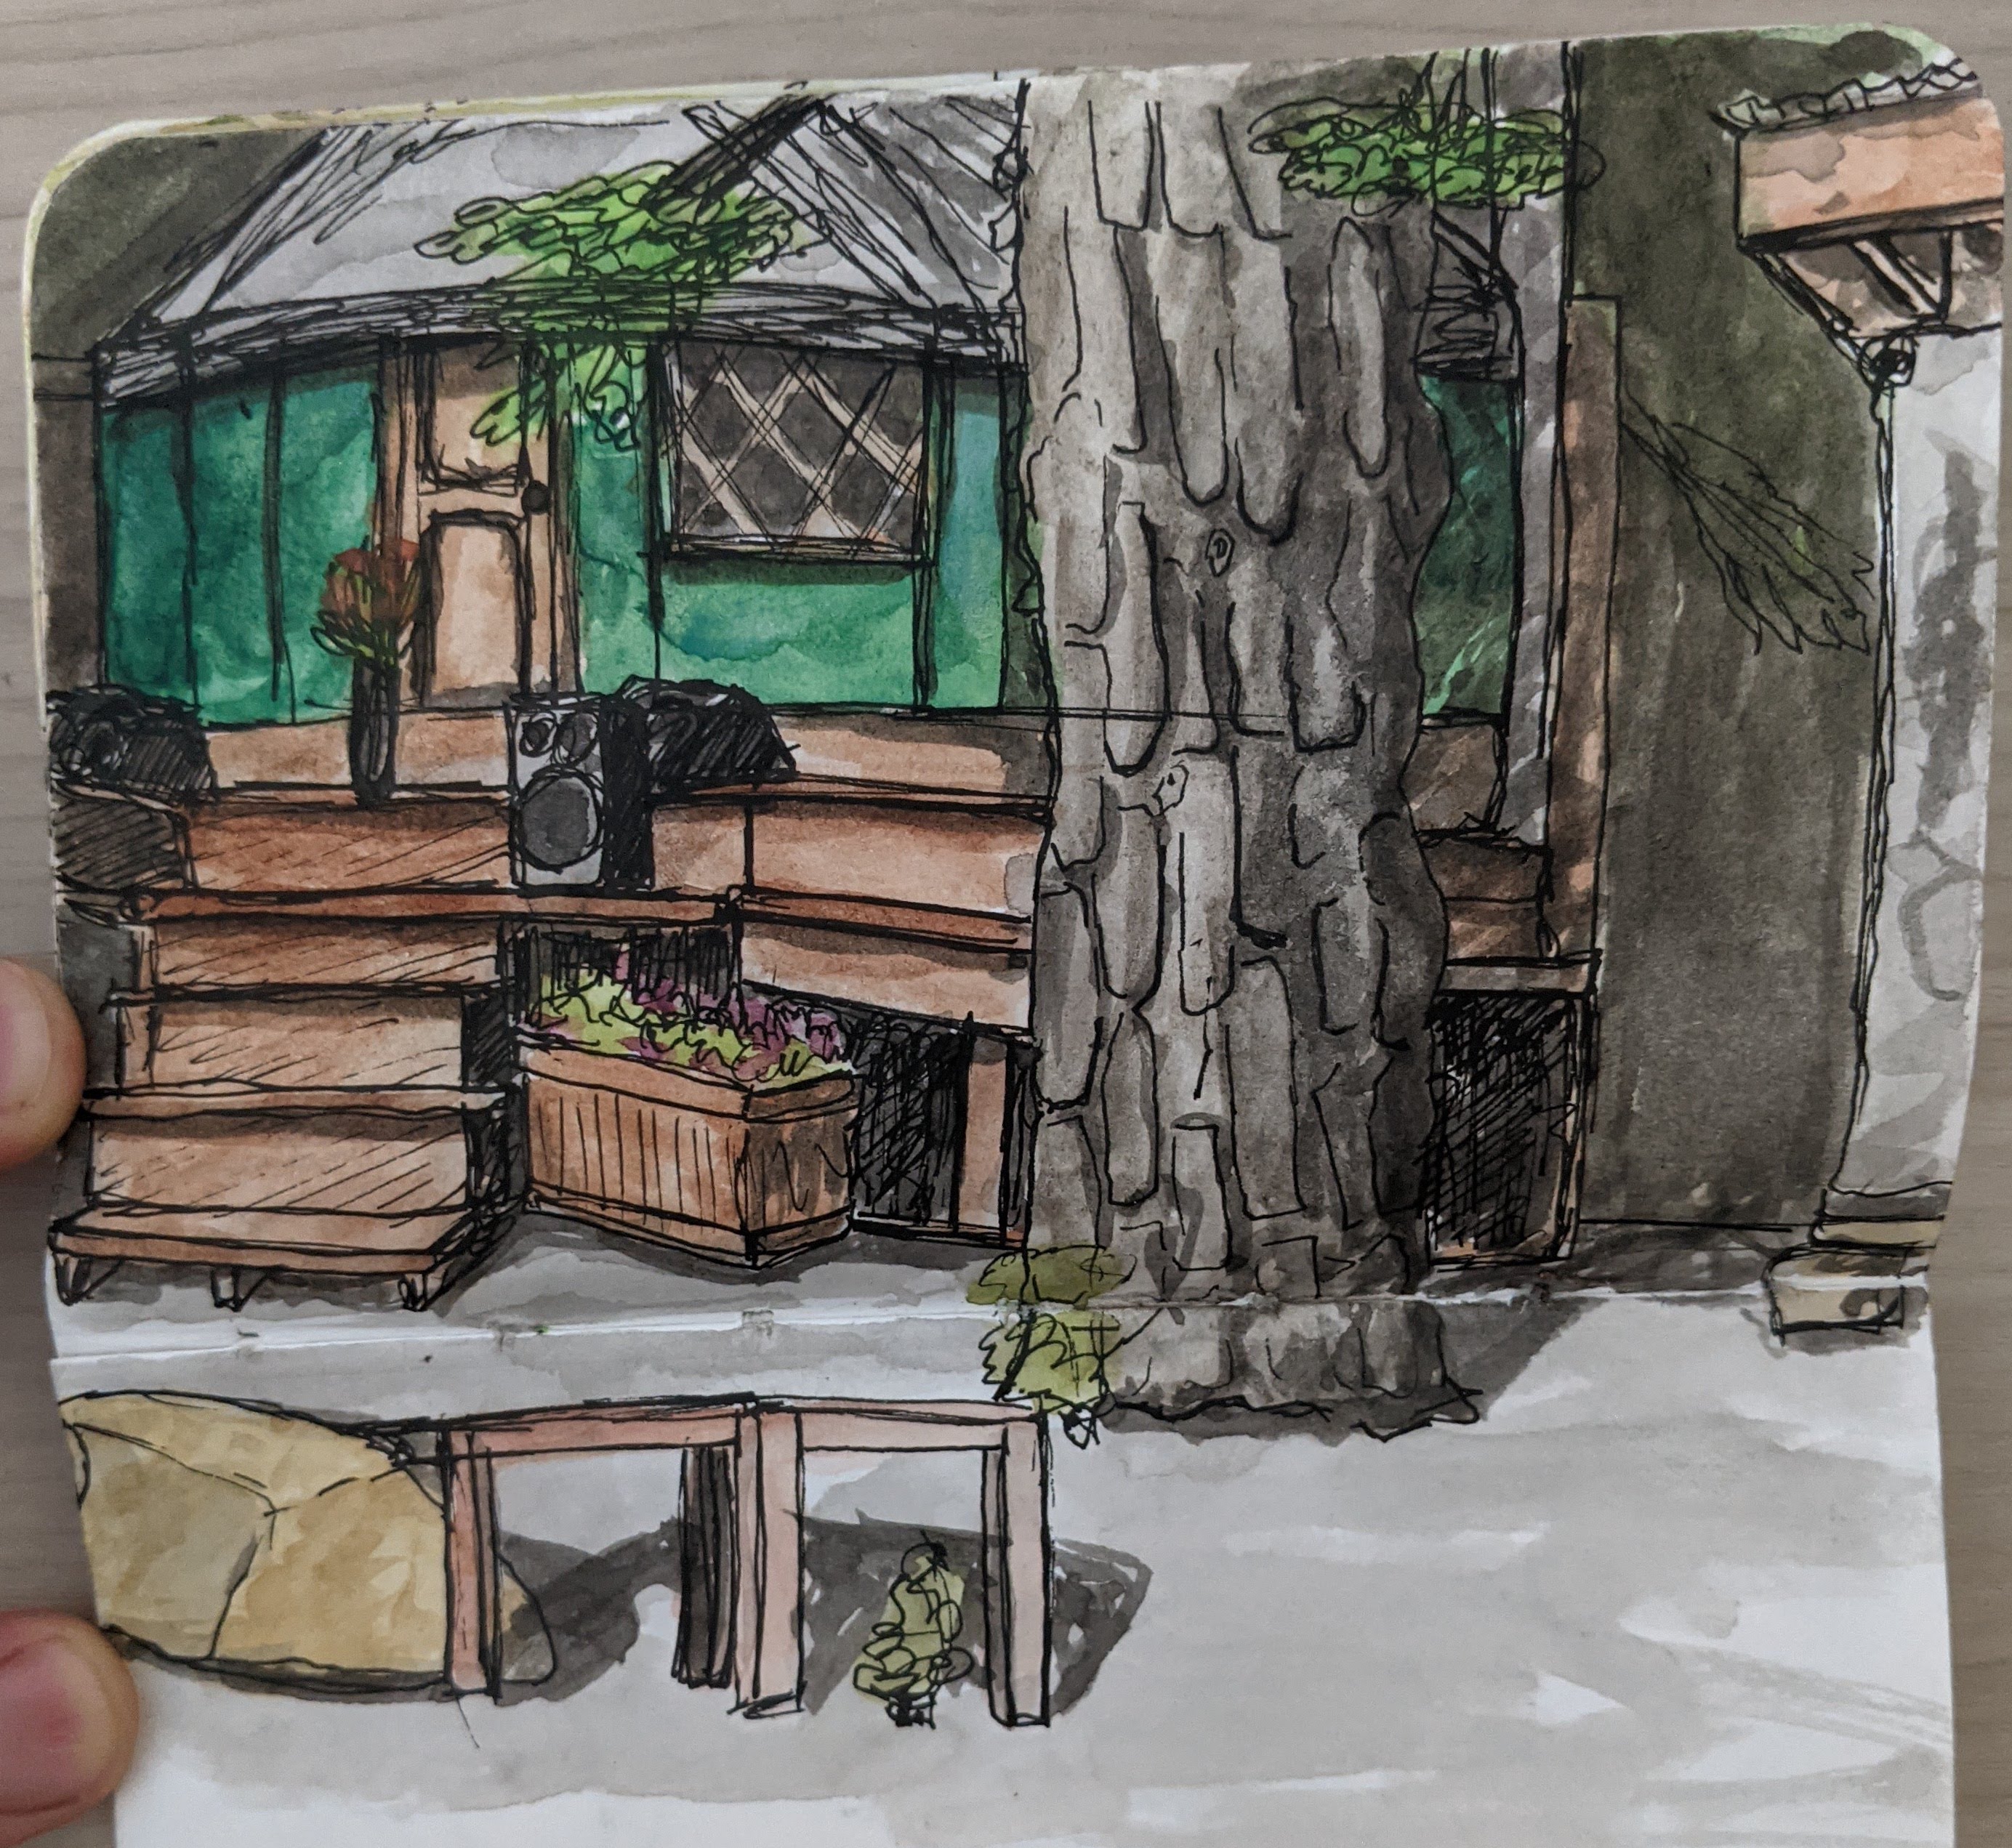 Sketch of a yurt music venue in the woods, not exactly urban